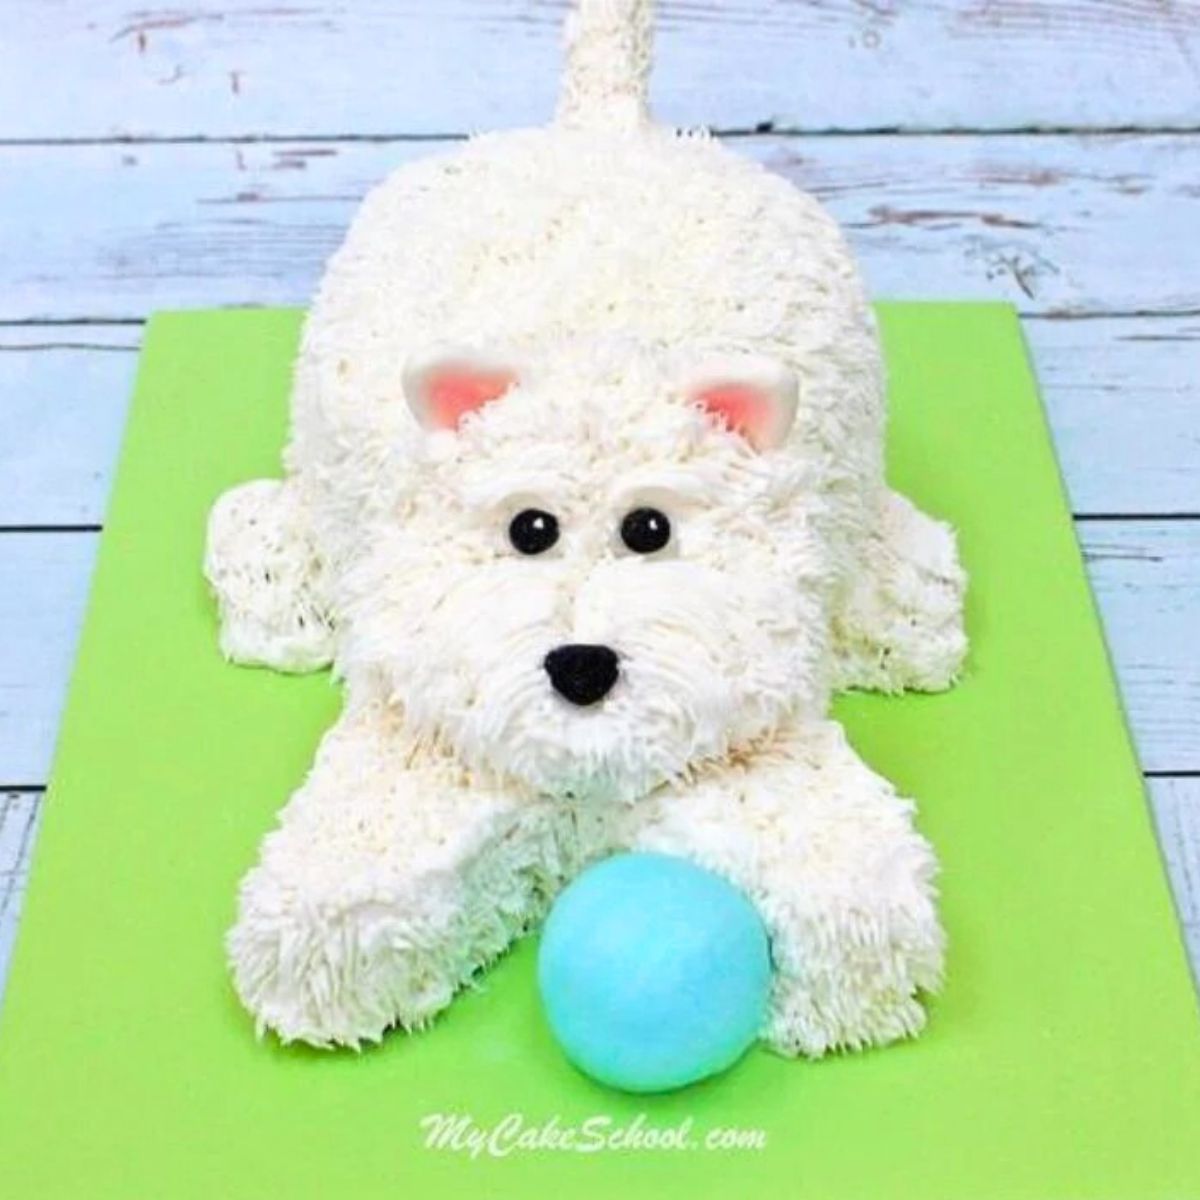 Finished Puppy Cake with white buttercream fur and blue fondant ball.